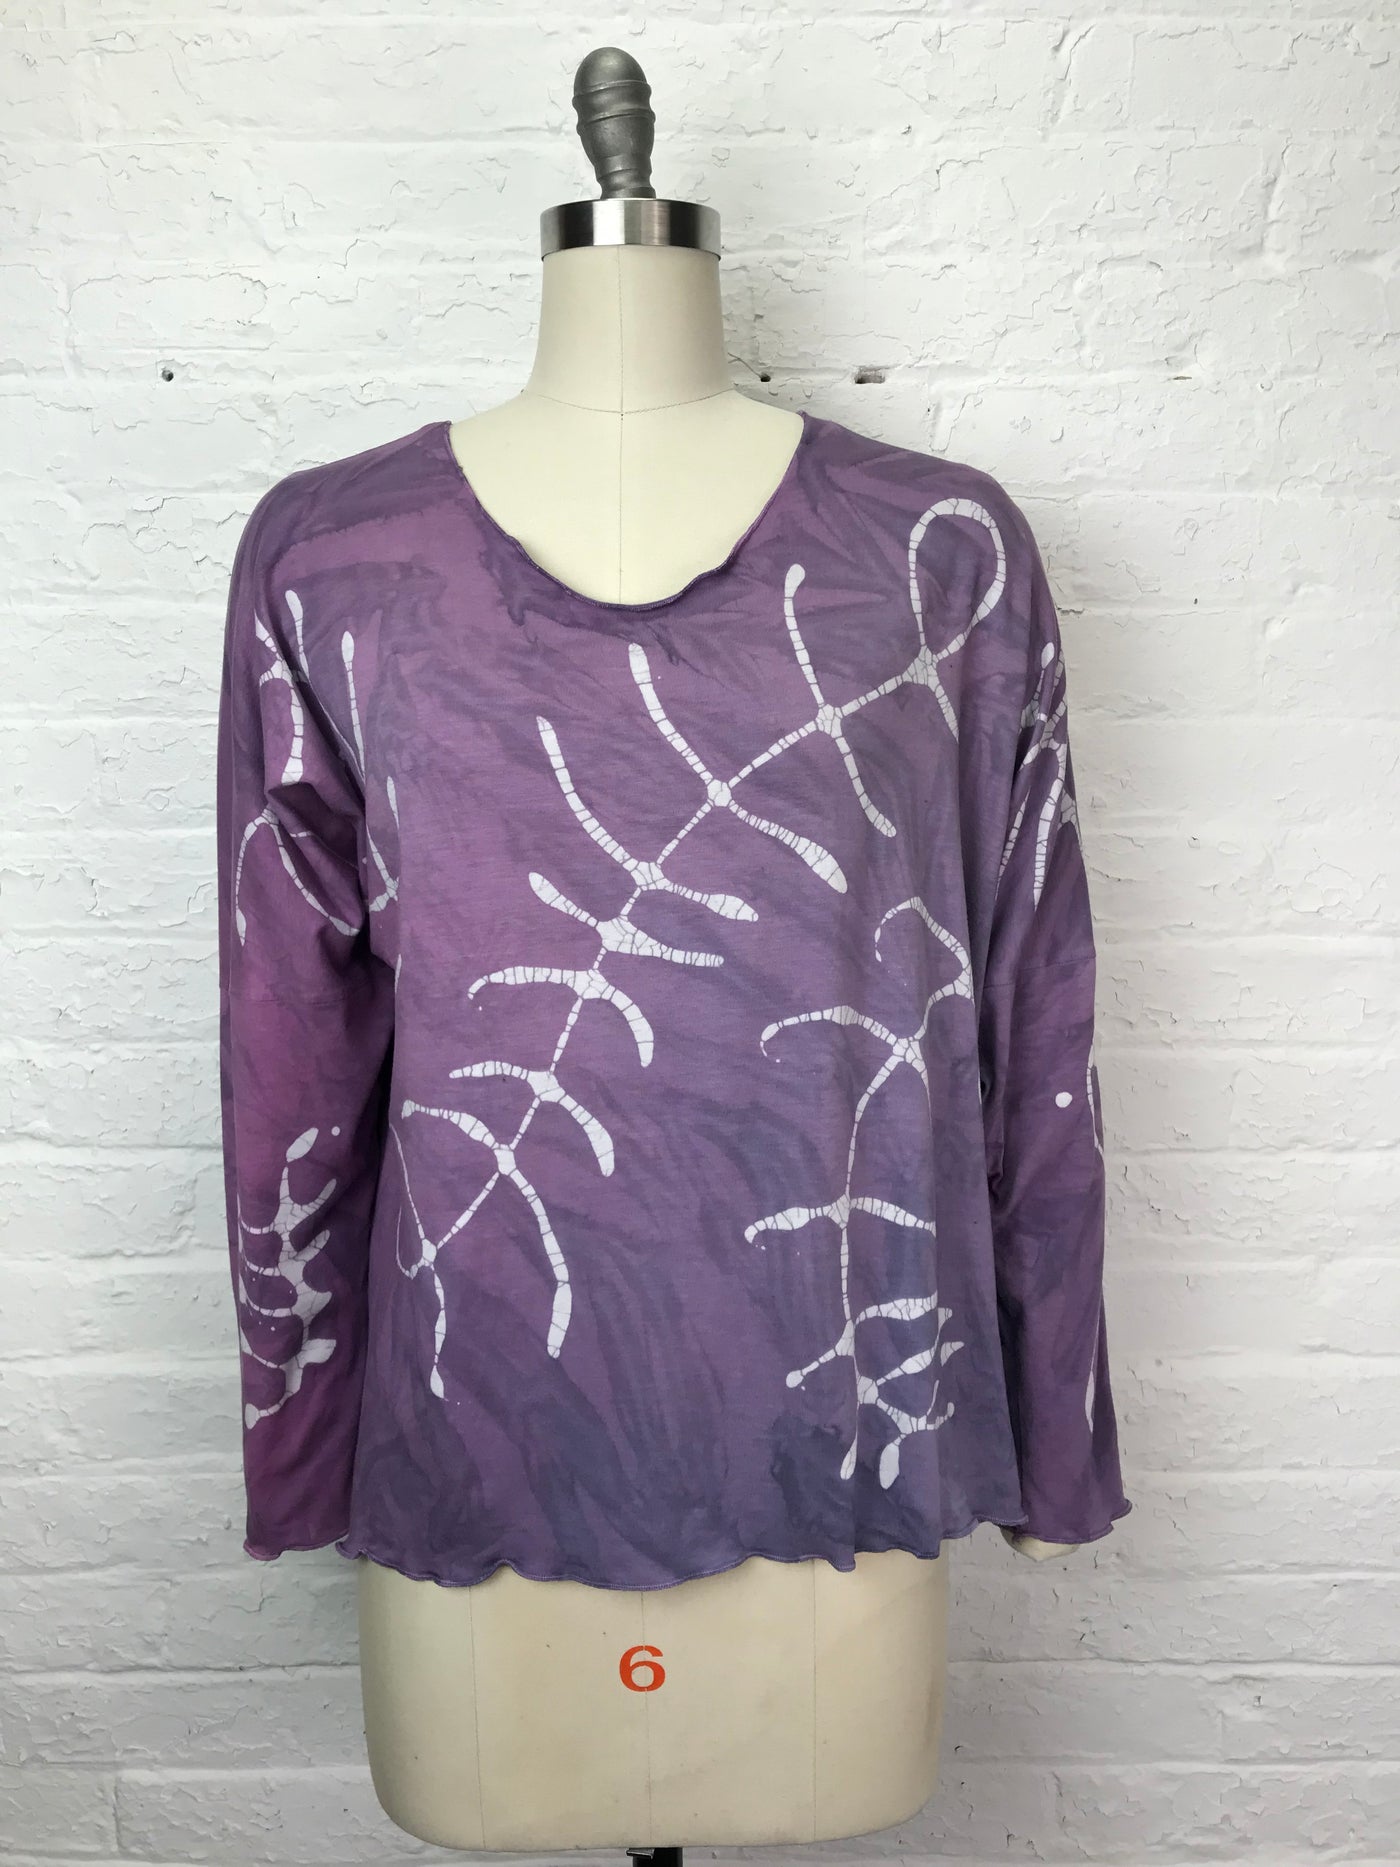 Nyla Long Sleeve Shirt in Lavender Archeology - One size